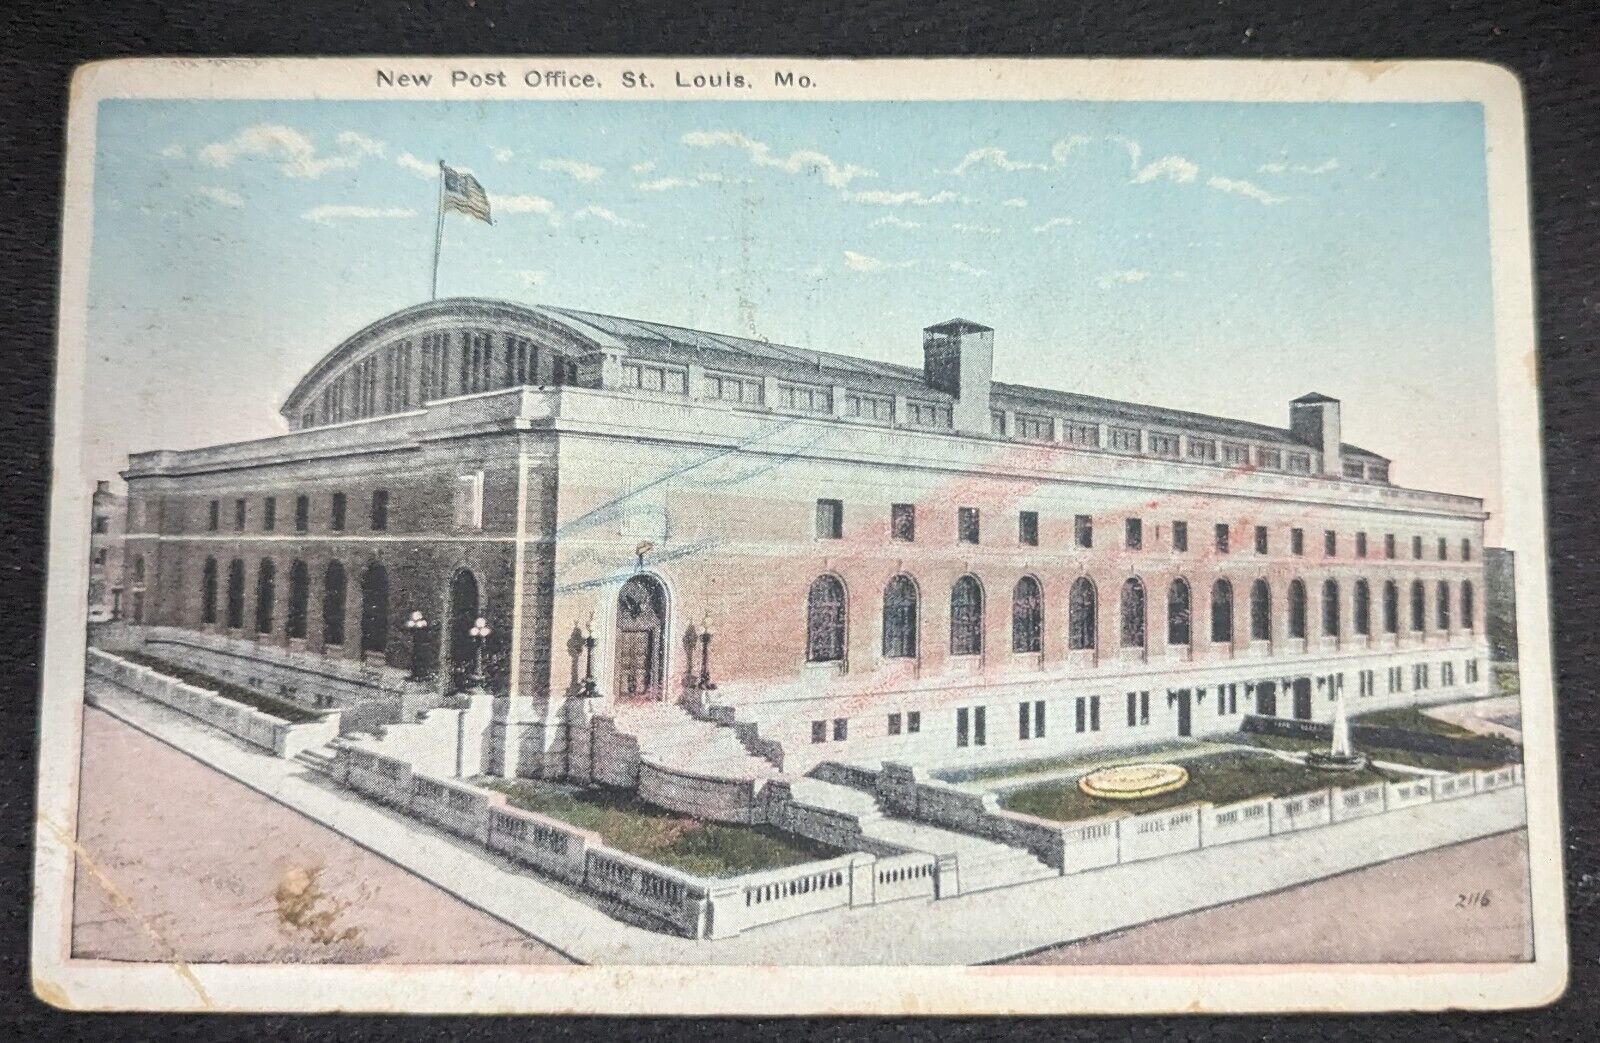 St Louis New Post Office 1918